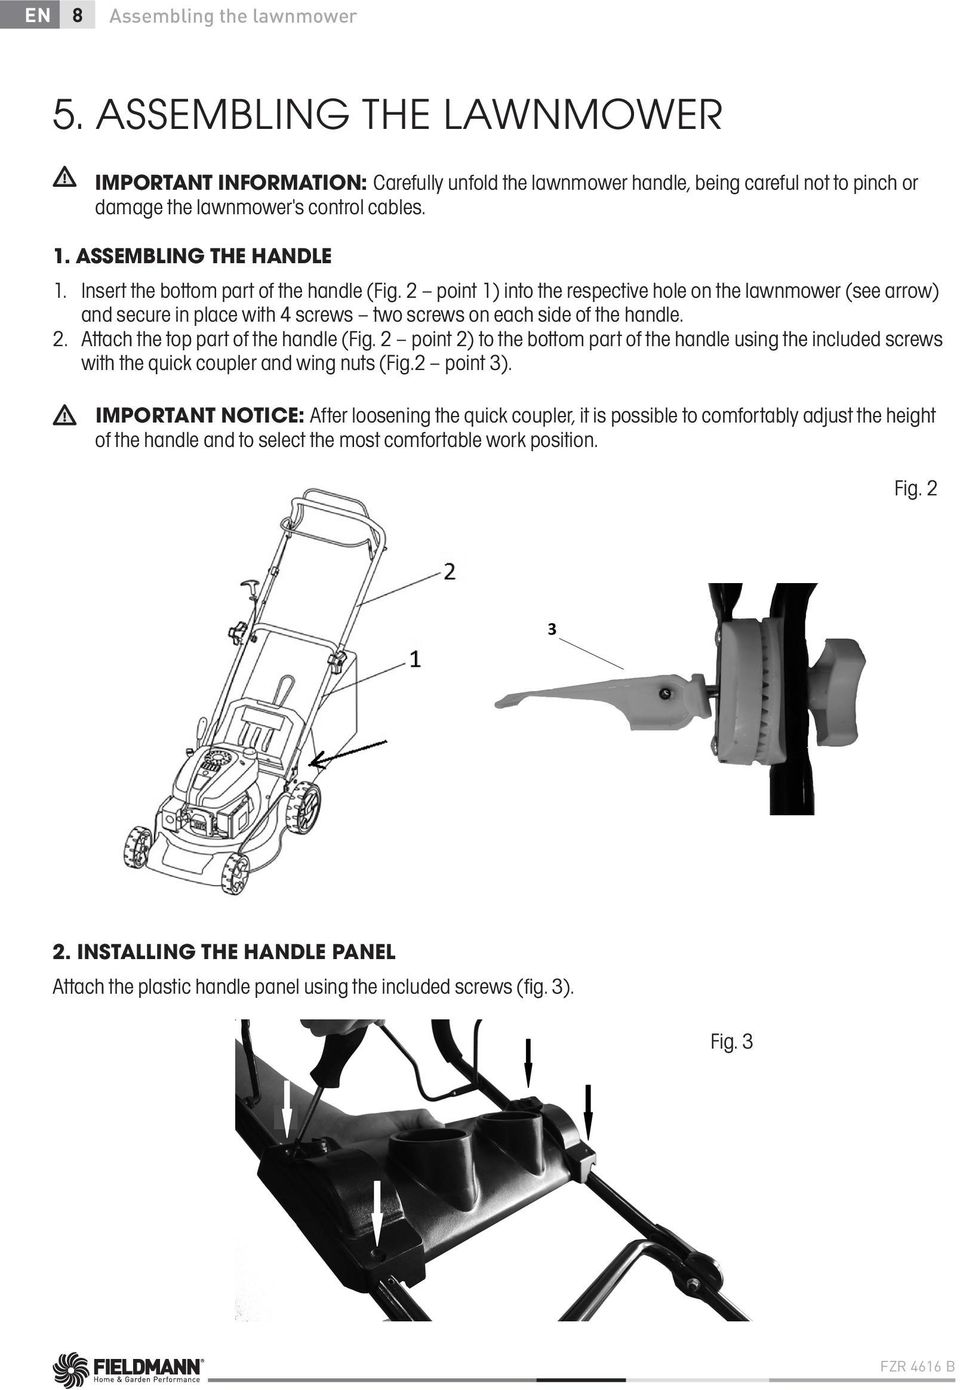 2 point 1) into the respective hole on the lawnmower (see arrow) and secure in place with 4 screws two screws on each side of the handle. 2. Attach the top part of the handle (Fig.